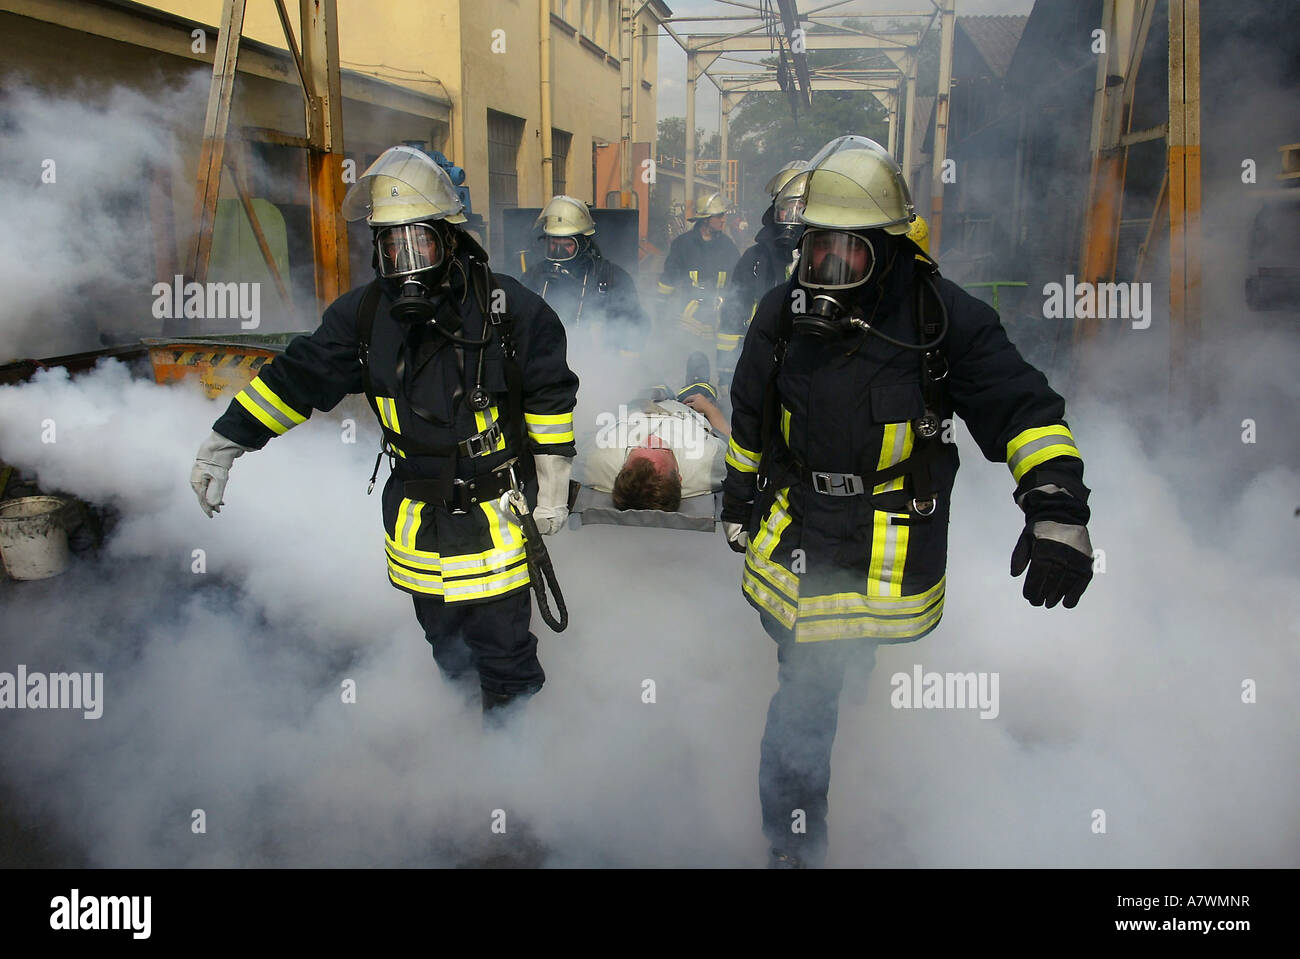 Fire fighters rescue a man during an exercice practice Stock Photo